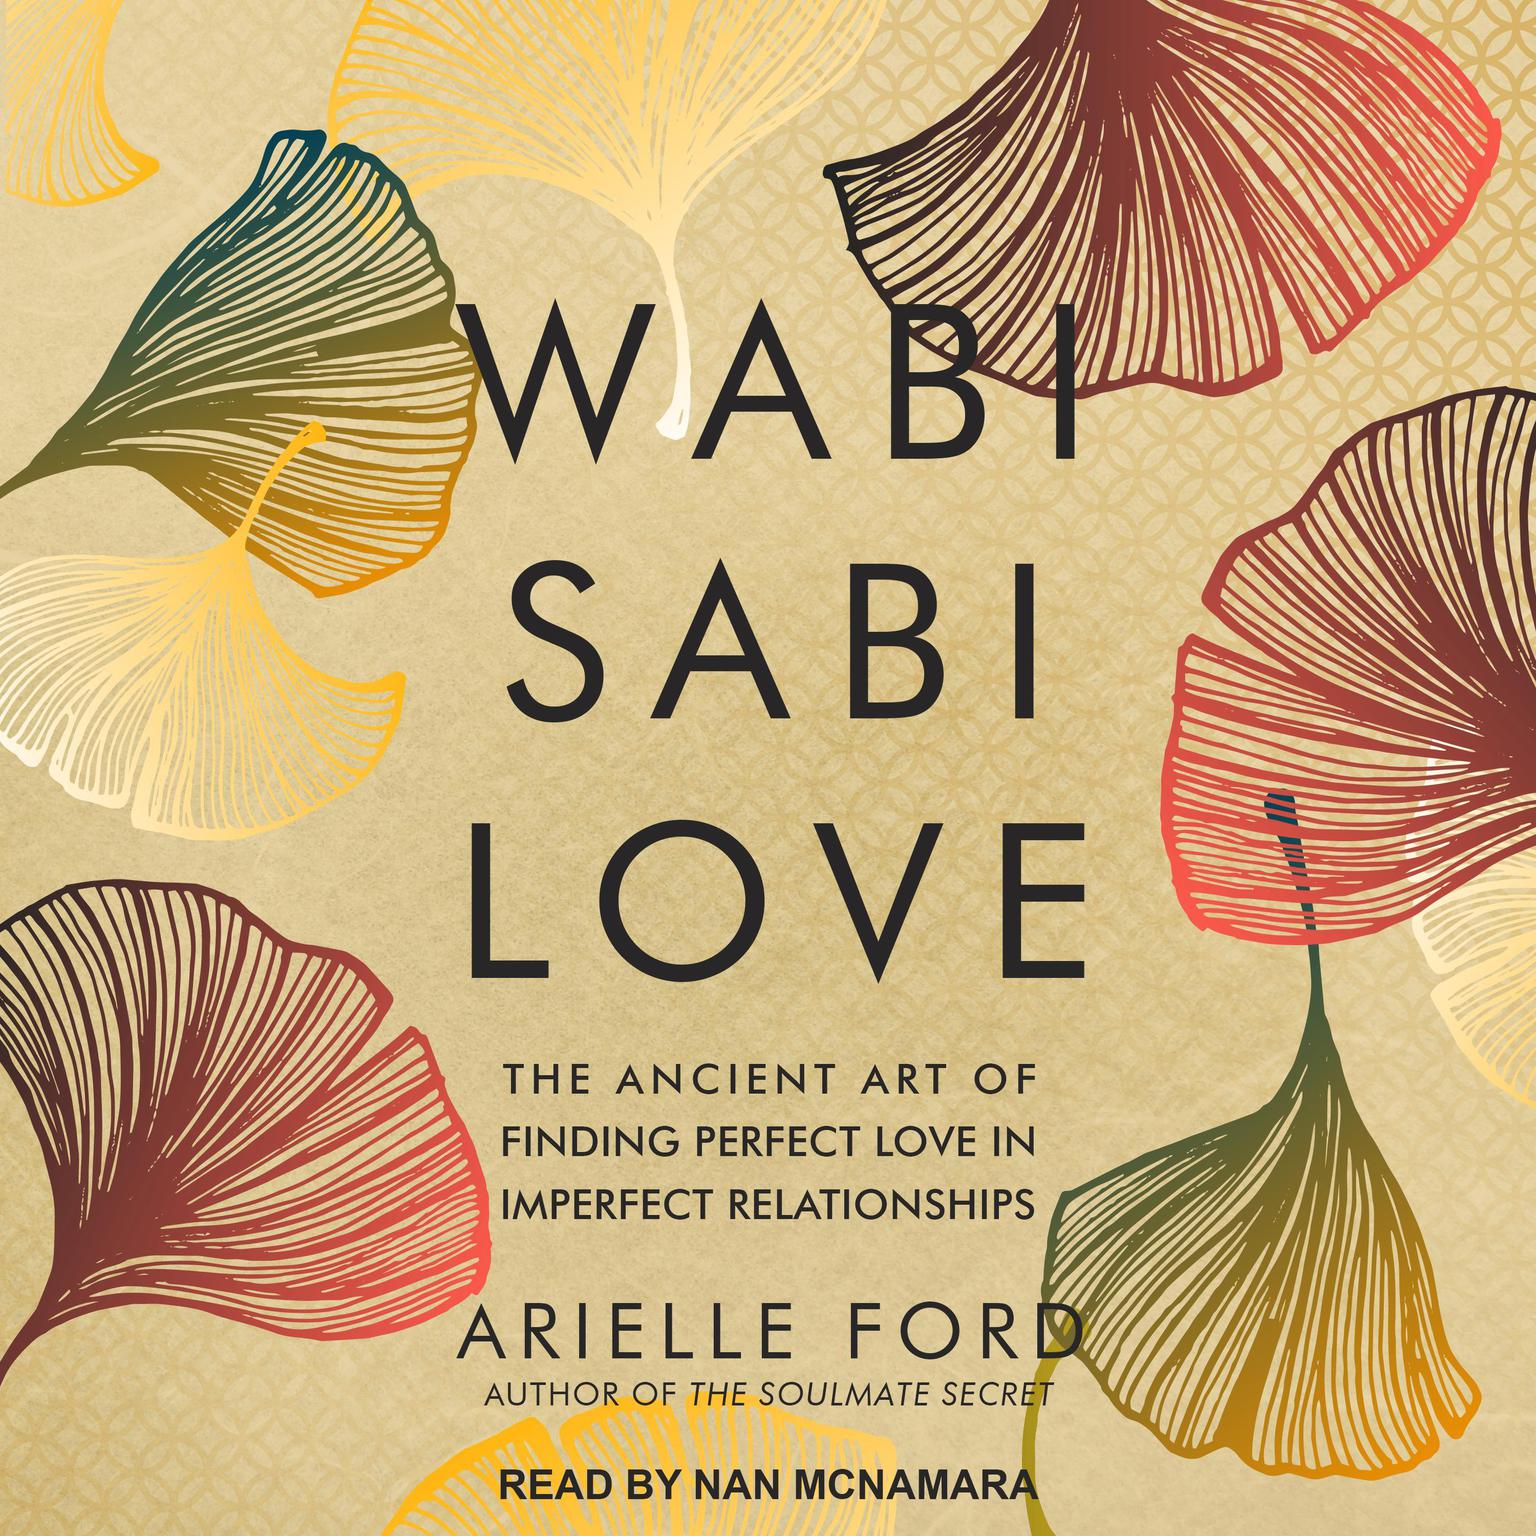 Wabi Sabi Love: The Ancient Art of Finding Perfect Love in Imperfect Relationships Audiobook, by Arielle Ford